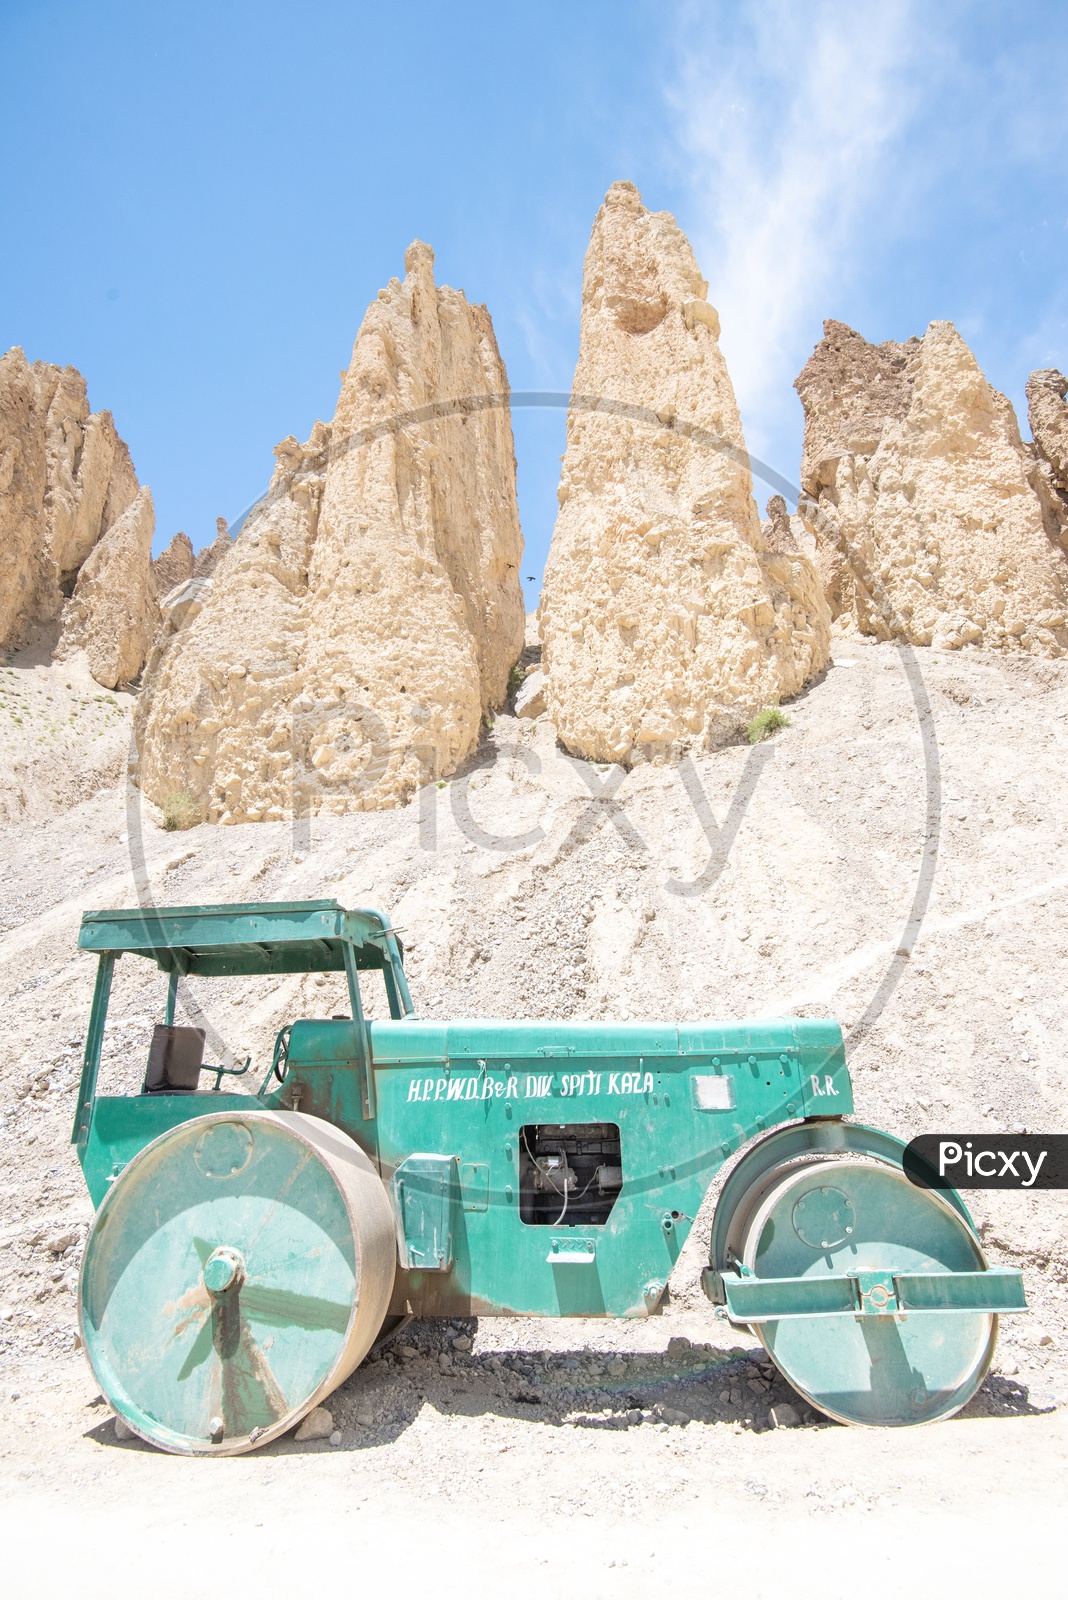 A road roller in Spiti valley